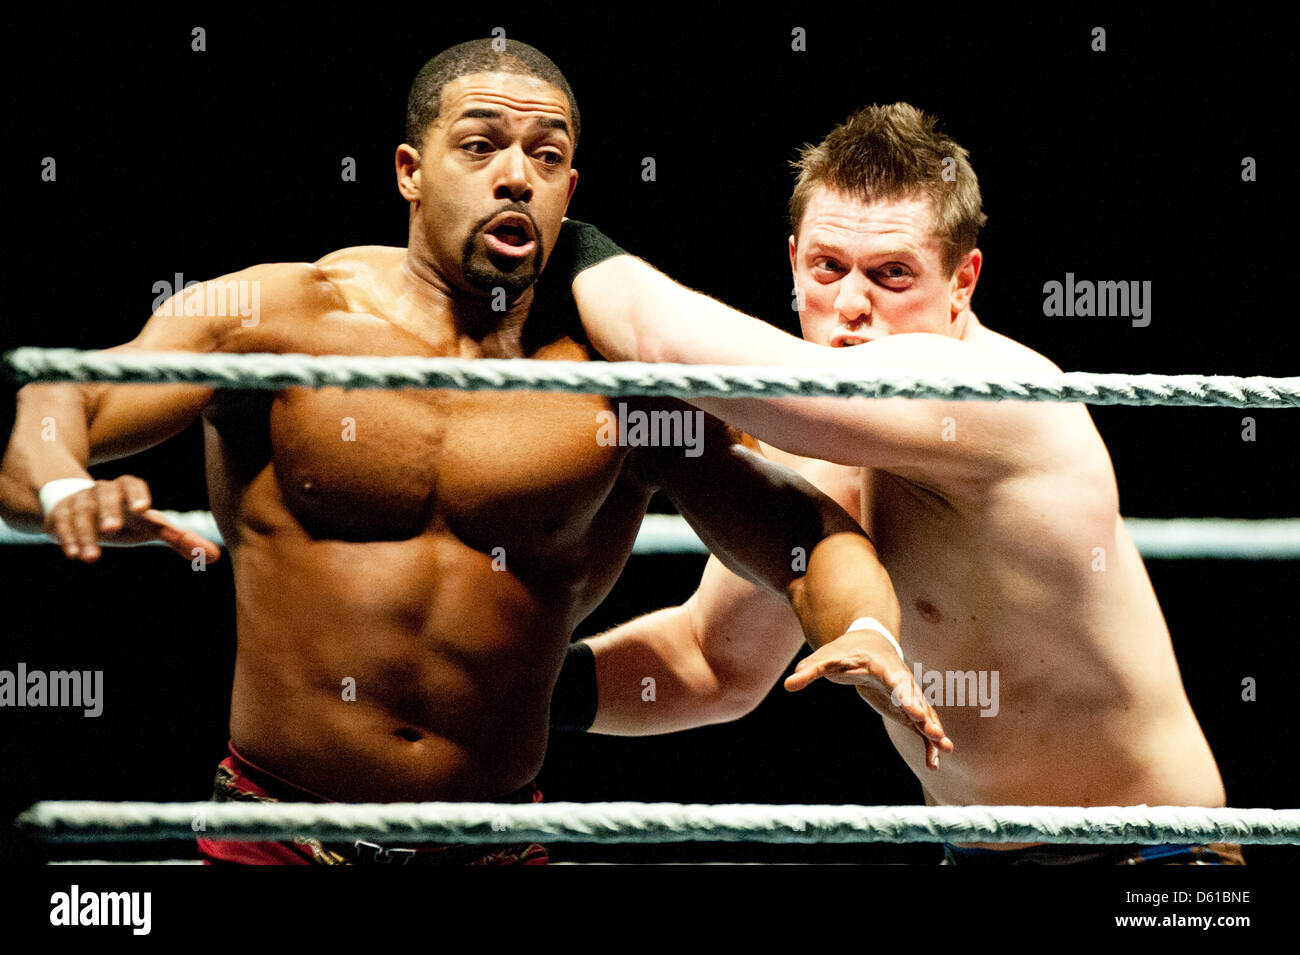 US-wrestlers David Otunga (L) and The Miz are locked in a fight at the RAW WrestleMania Revenge Tour at the o2 World canue in Berlin, Germany, 14 April 2012. The WWE (World Wrestling Entertainment) celebrates its 20th German anniversary this April. The first show in Germany was staged in Kiel, Germany, in April 1992. Photo: Sebastian Kahnert Stock Photo